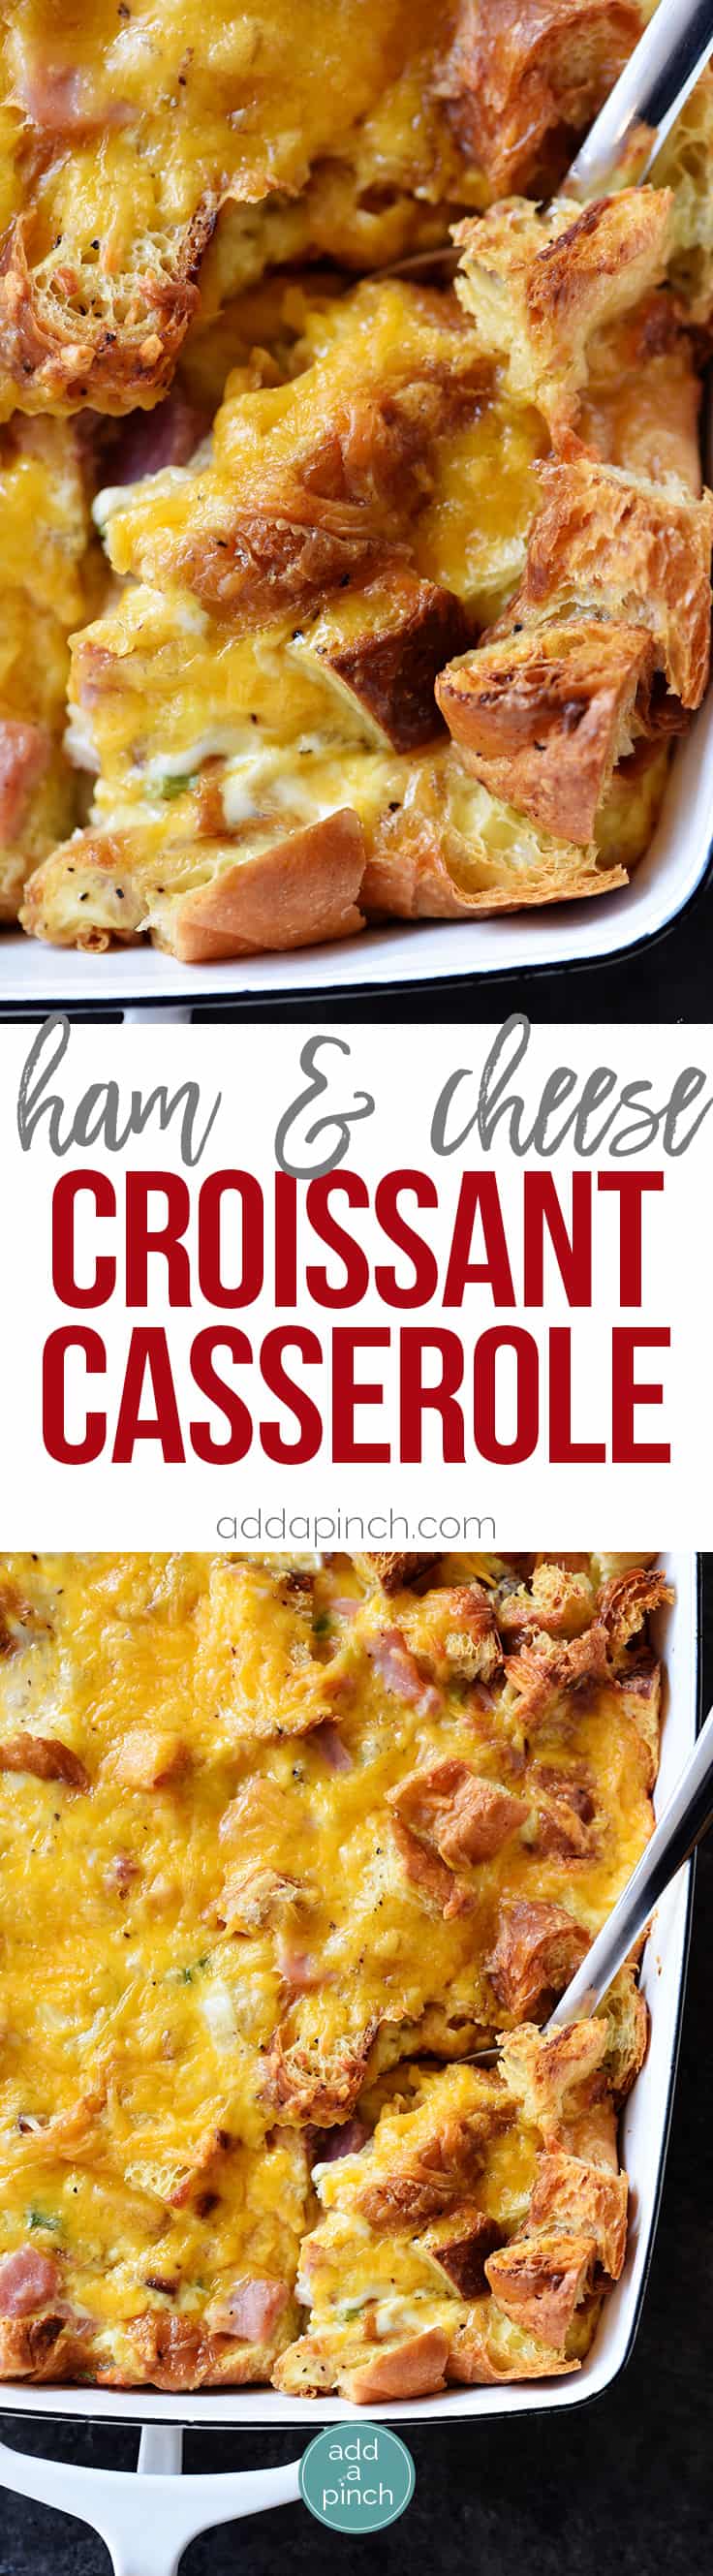 Ham and Cheese Croissant Casserole Recipe - An easy and delicious breakfast casserole that everyone loves! Made of ham, two cheeses, and buttery croissants and baked to perfection! // addapinch.com